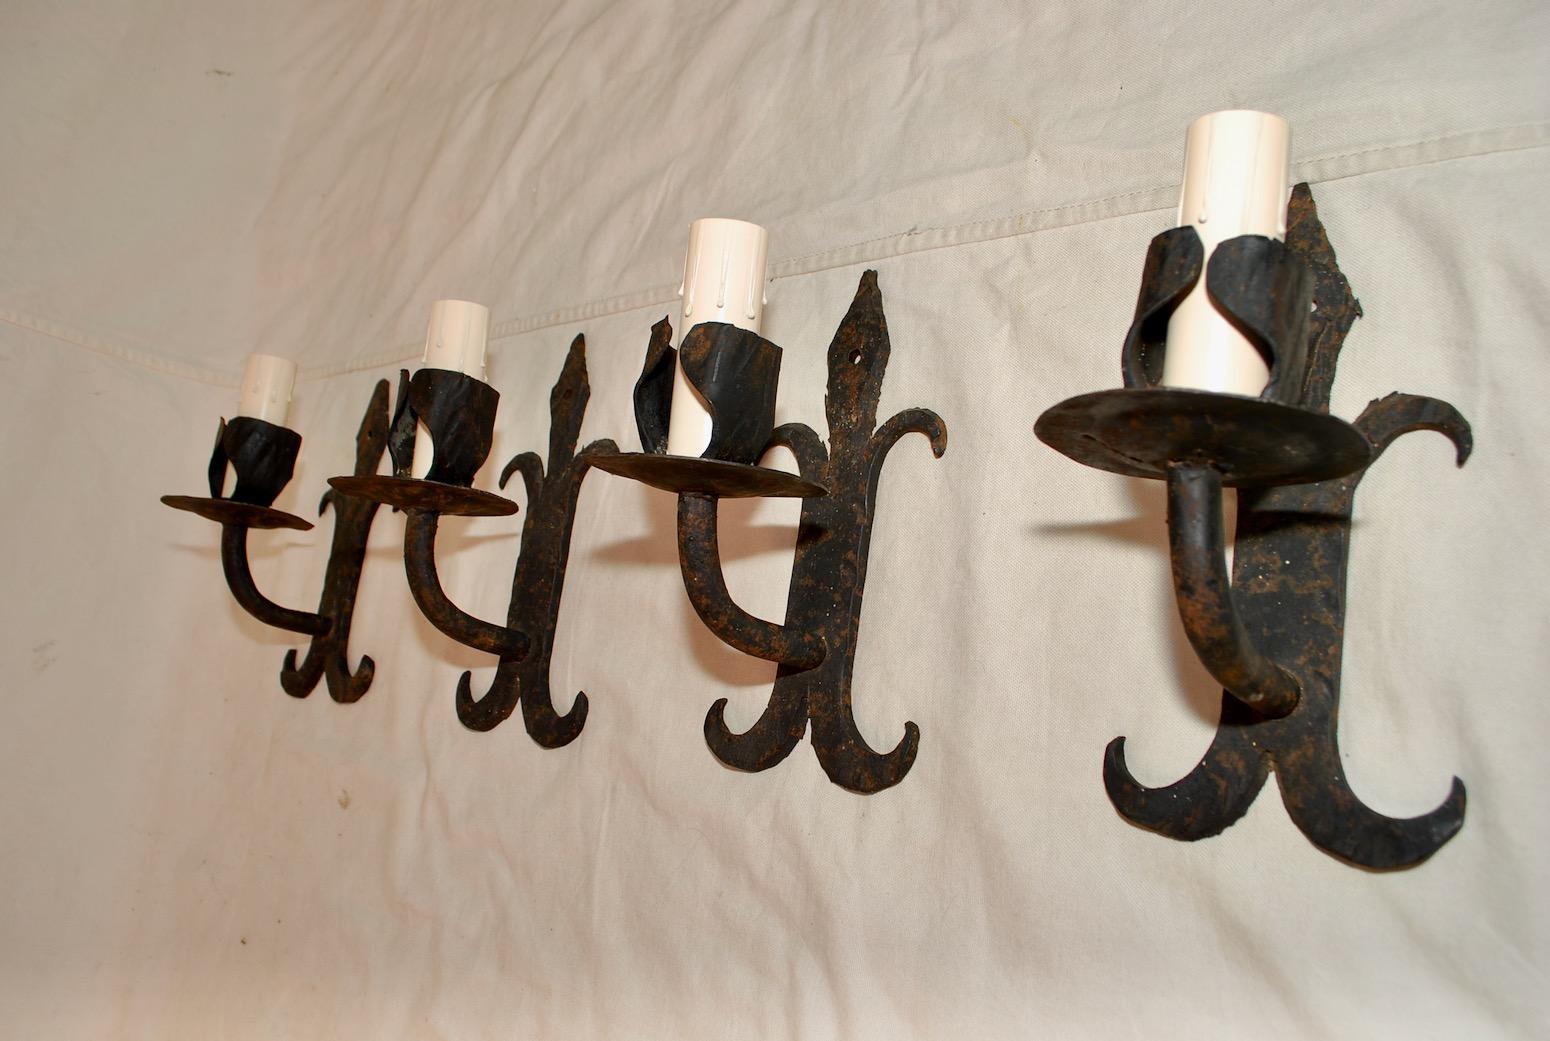 We also have our own line of wrought iron reproduction sconces and chandeliers, or we could do your own design
A very nice set of four all hands made wrought iron sconces, the patina is much nicer in person, we could sell them by pair if you